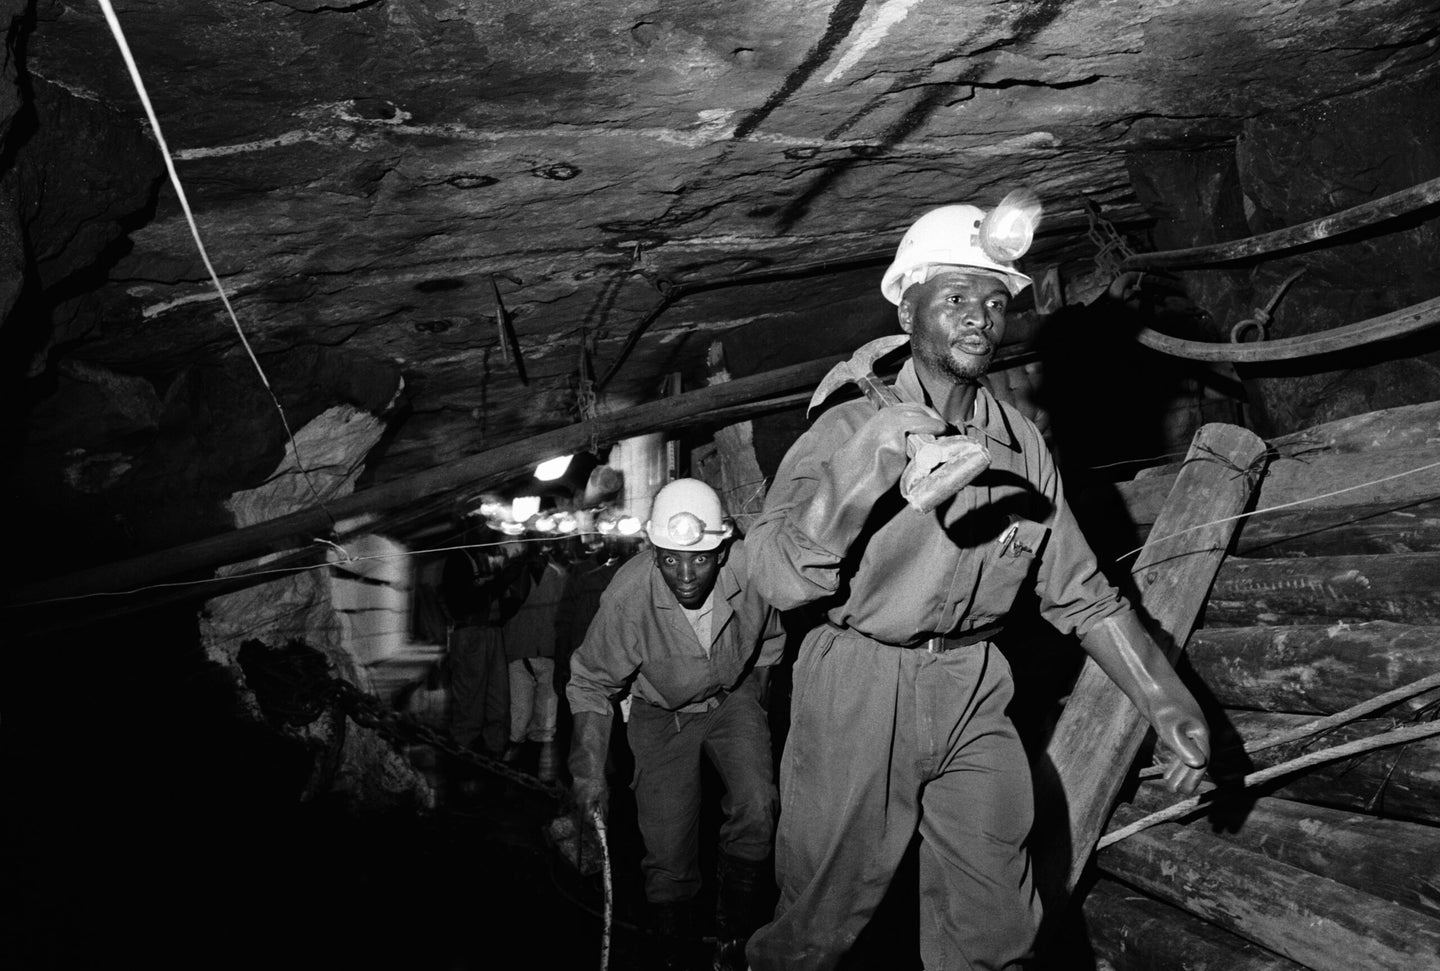 Miners working for the Lonmin Platinum company in South Africa walk along an underground tunnel in the early 2000s.